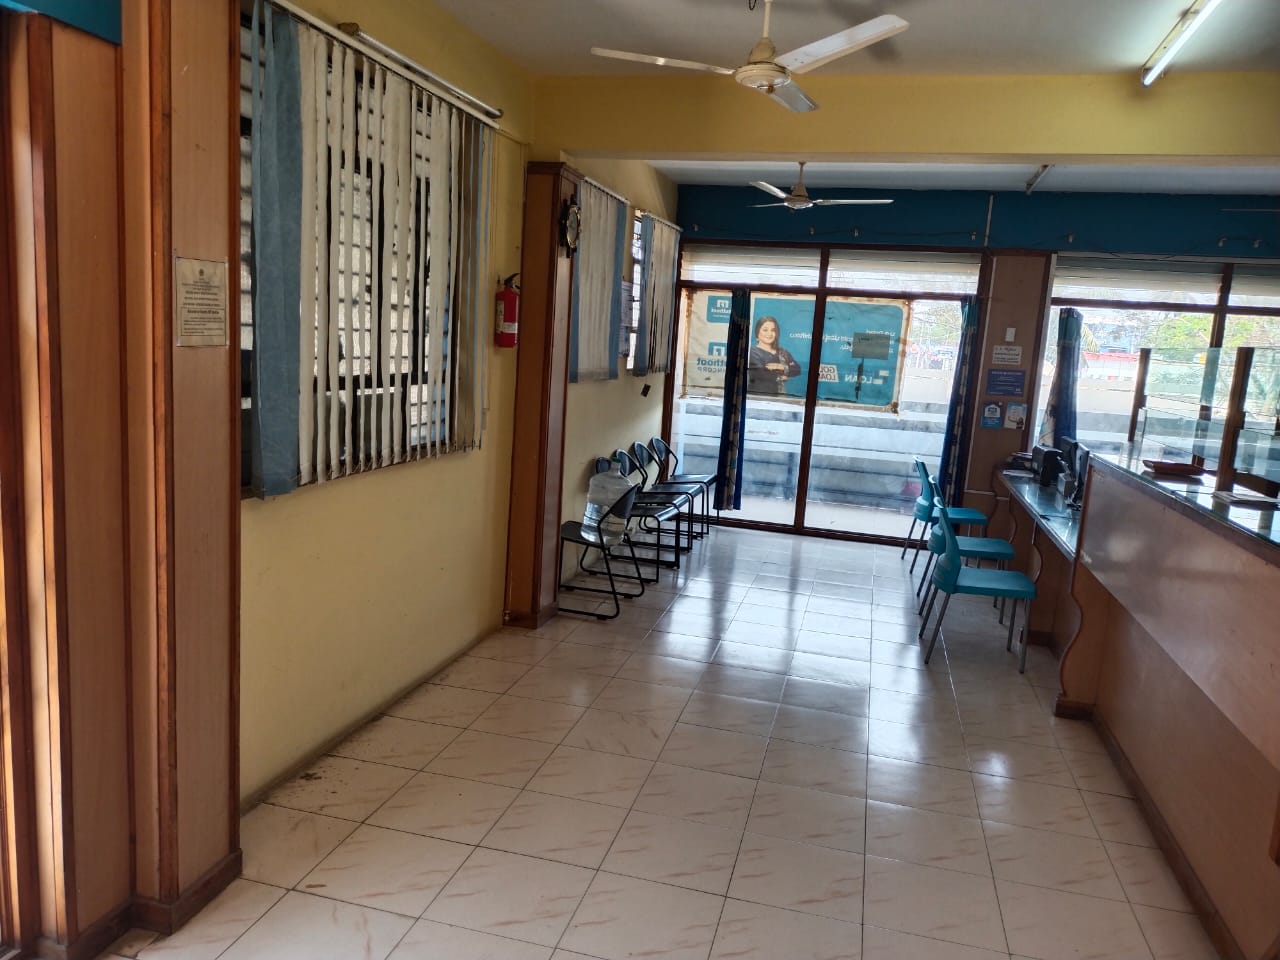 Photos and Videos of Muthoot Fincorp Gold Loan in Koppa Maddur, Mandya